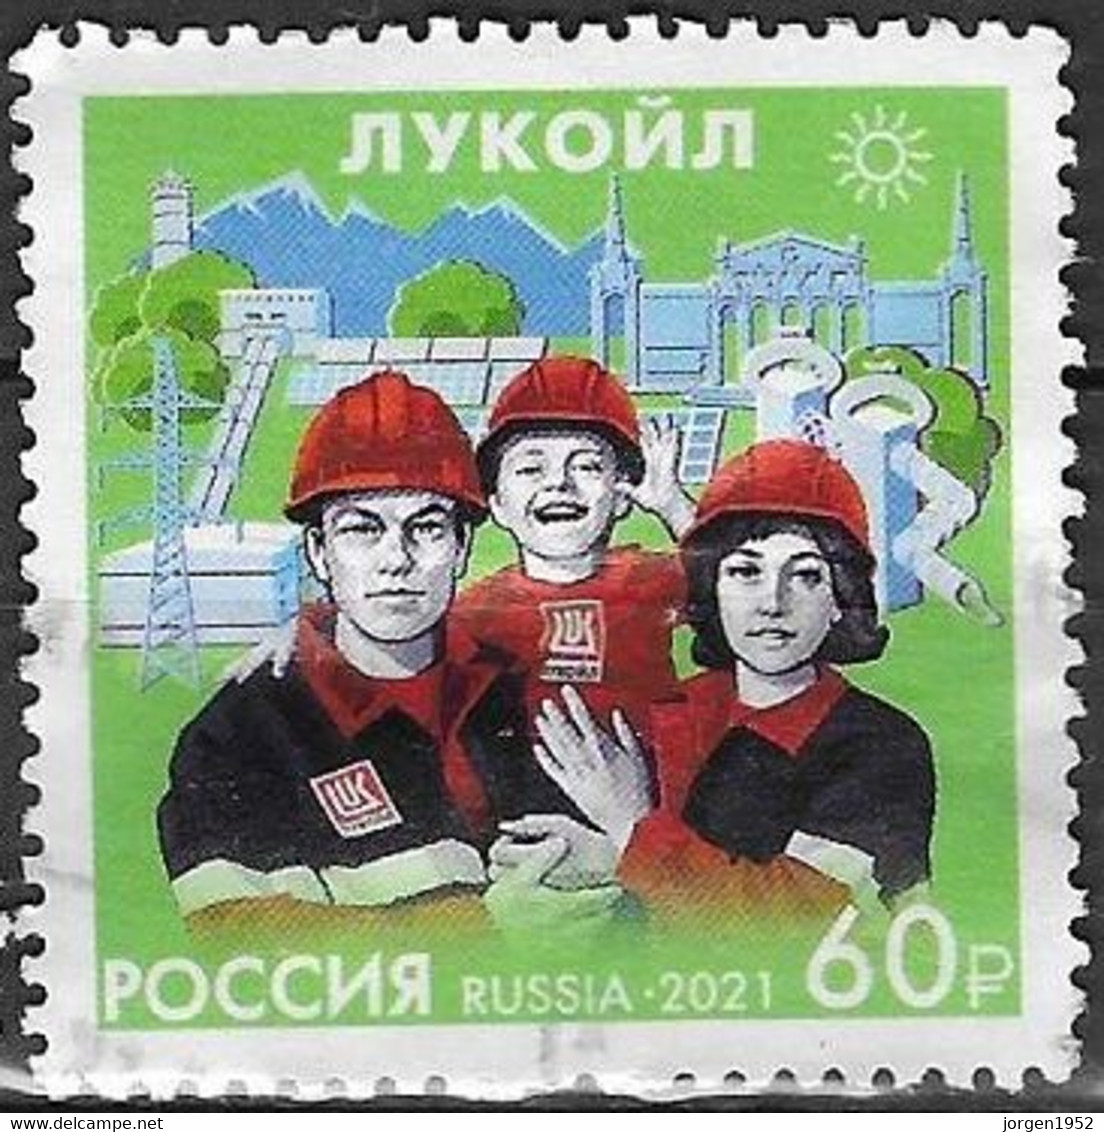 RUSSIA # FROM 2021  STAMPWORLD 3088 - Usados